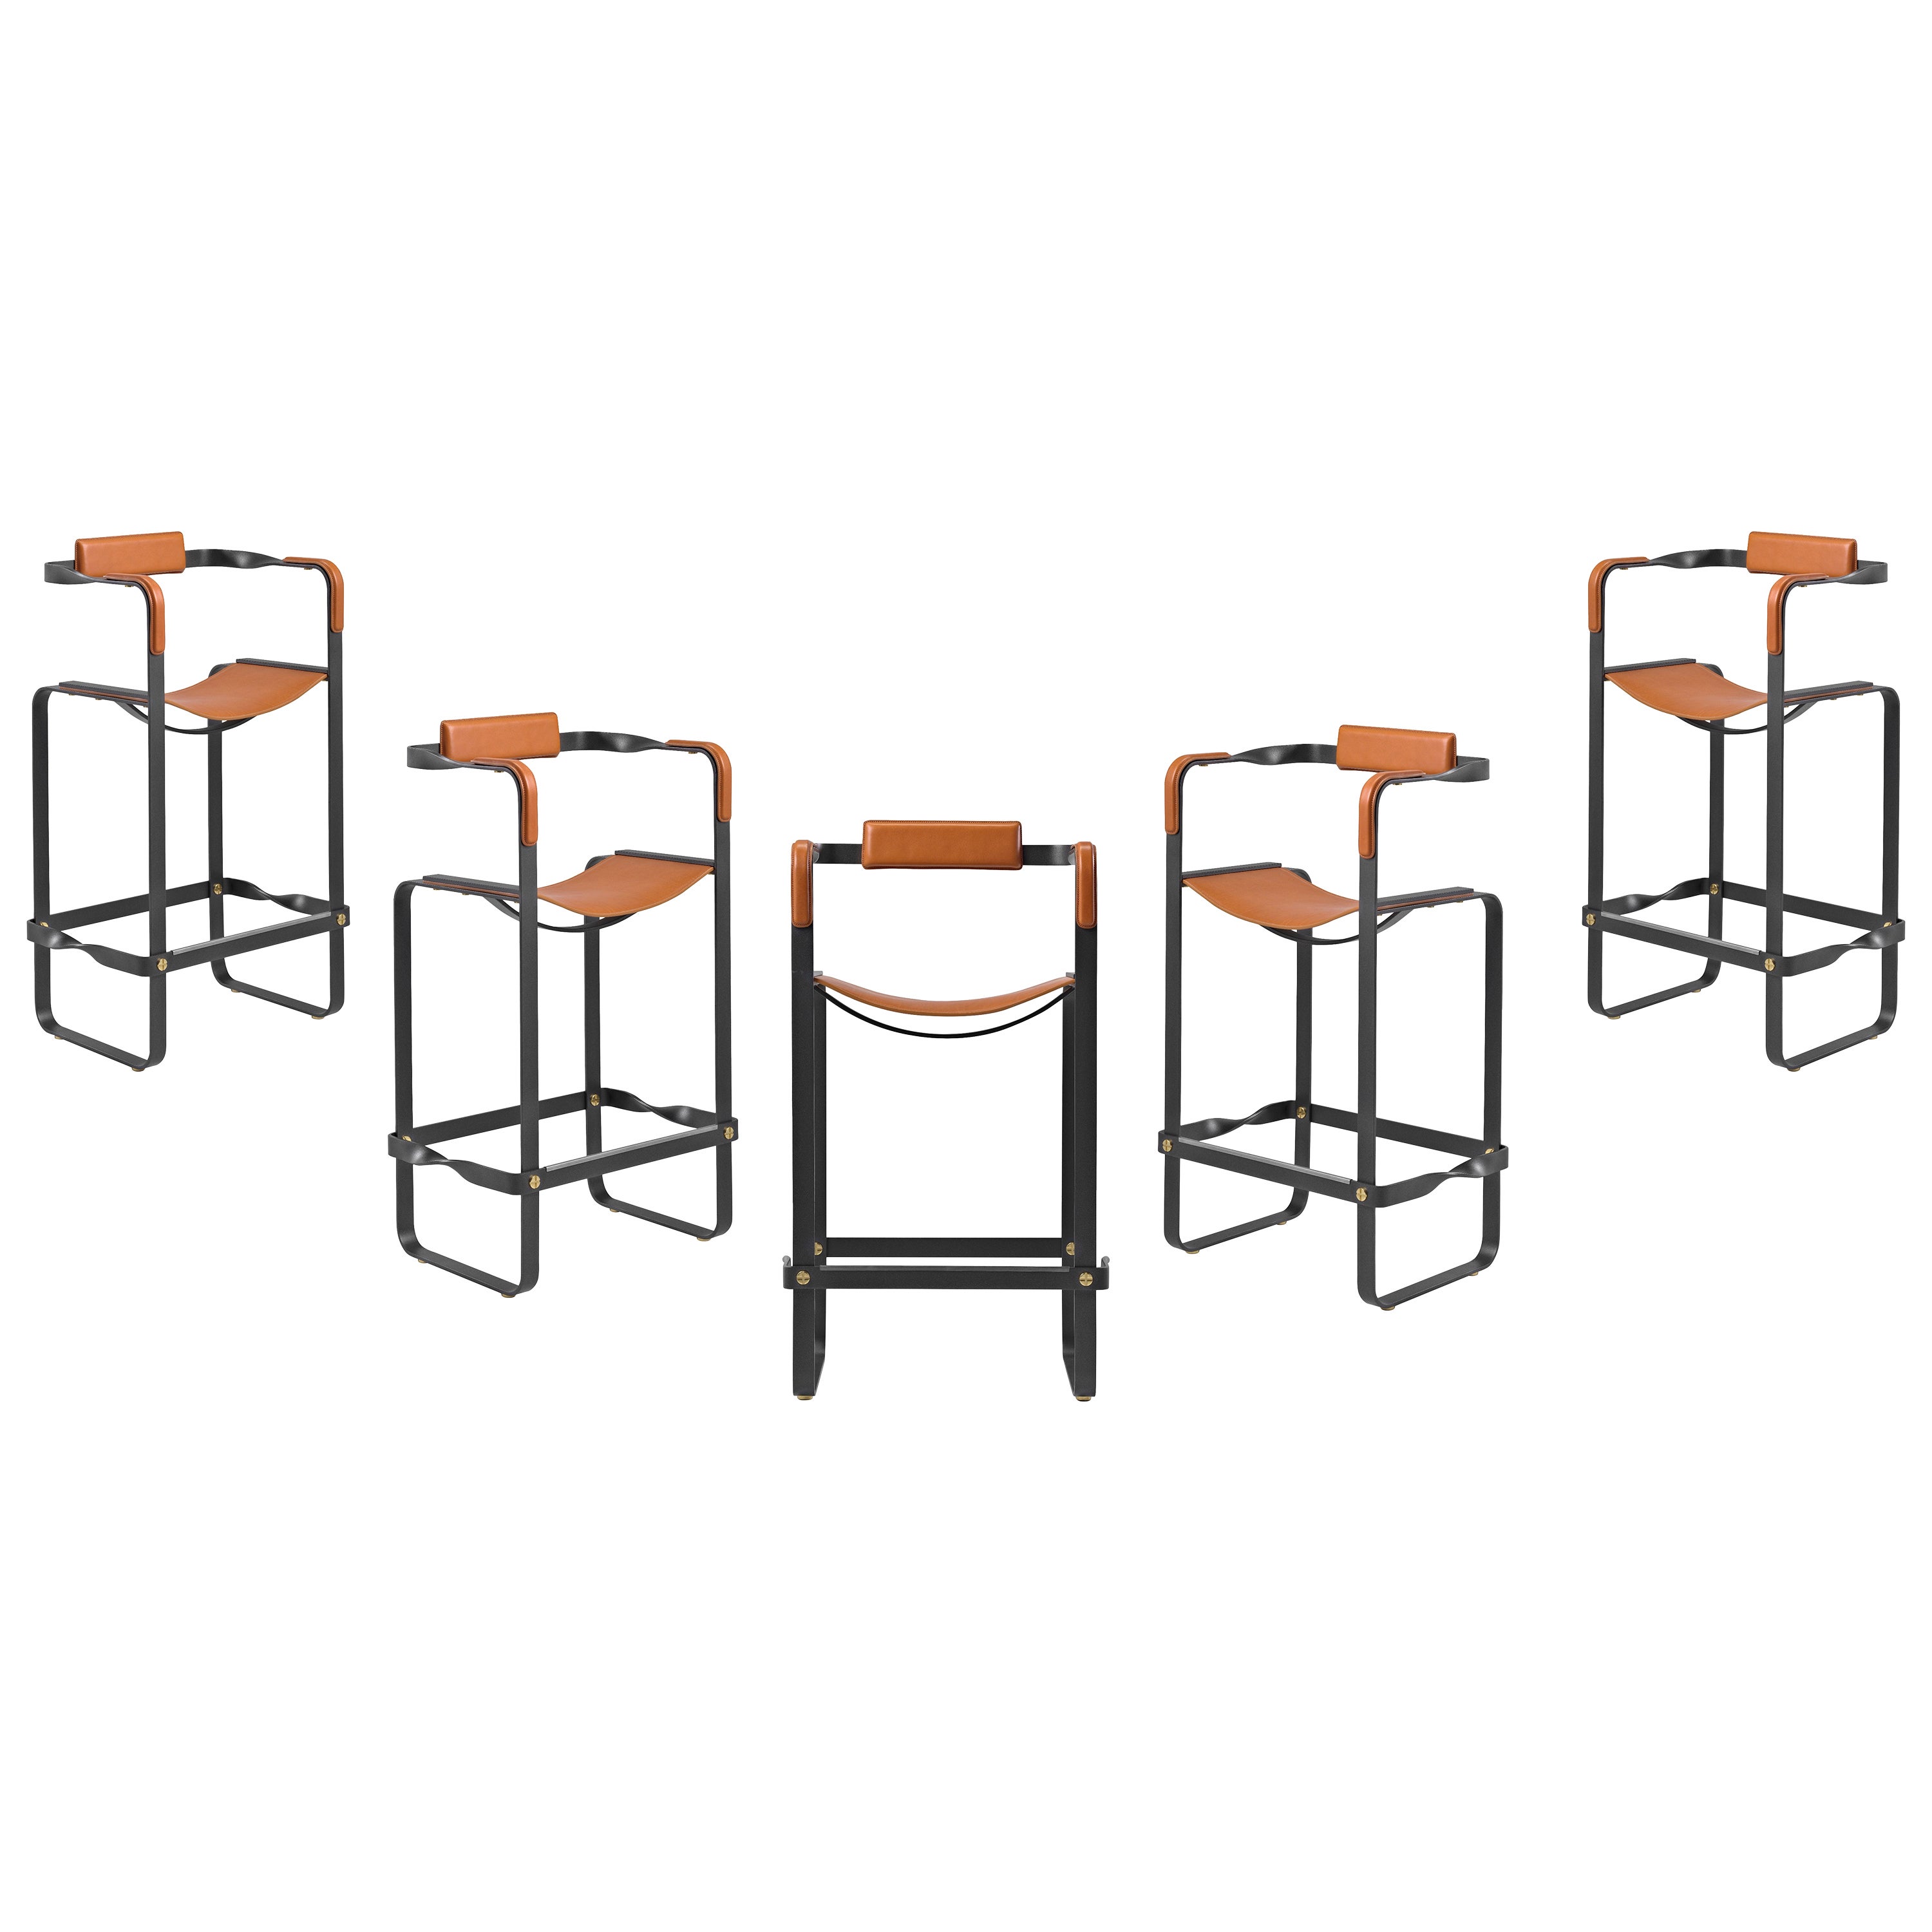 Set of 5 Classic Contemporary Bar Stool w. Backrest Nuit Noir & Tobacco Leather For Sale